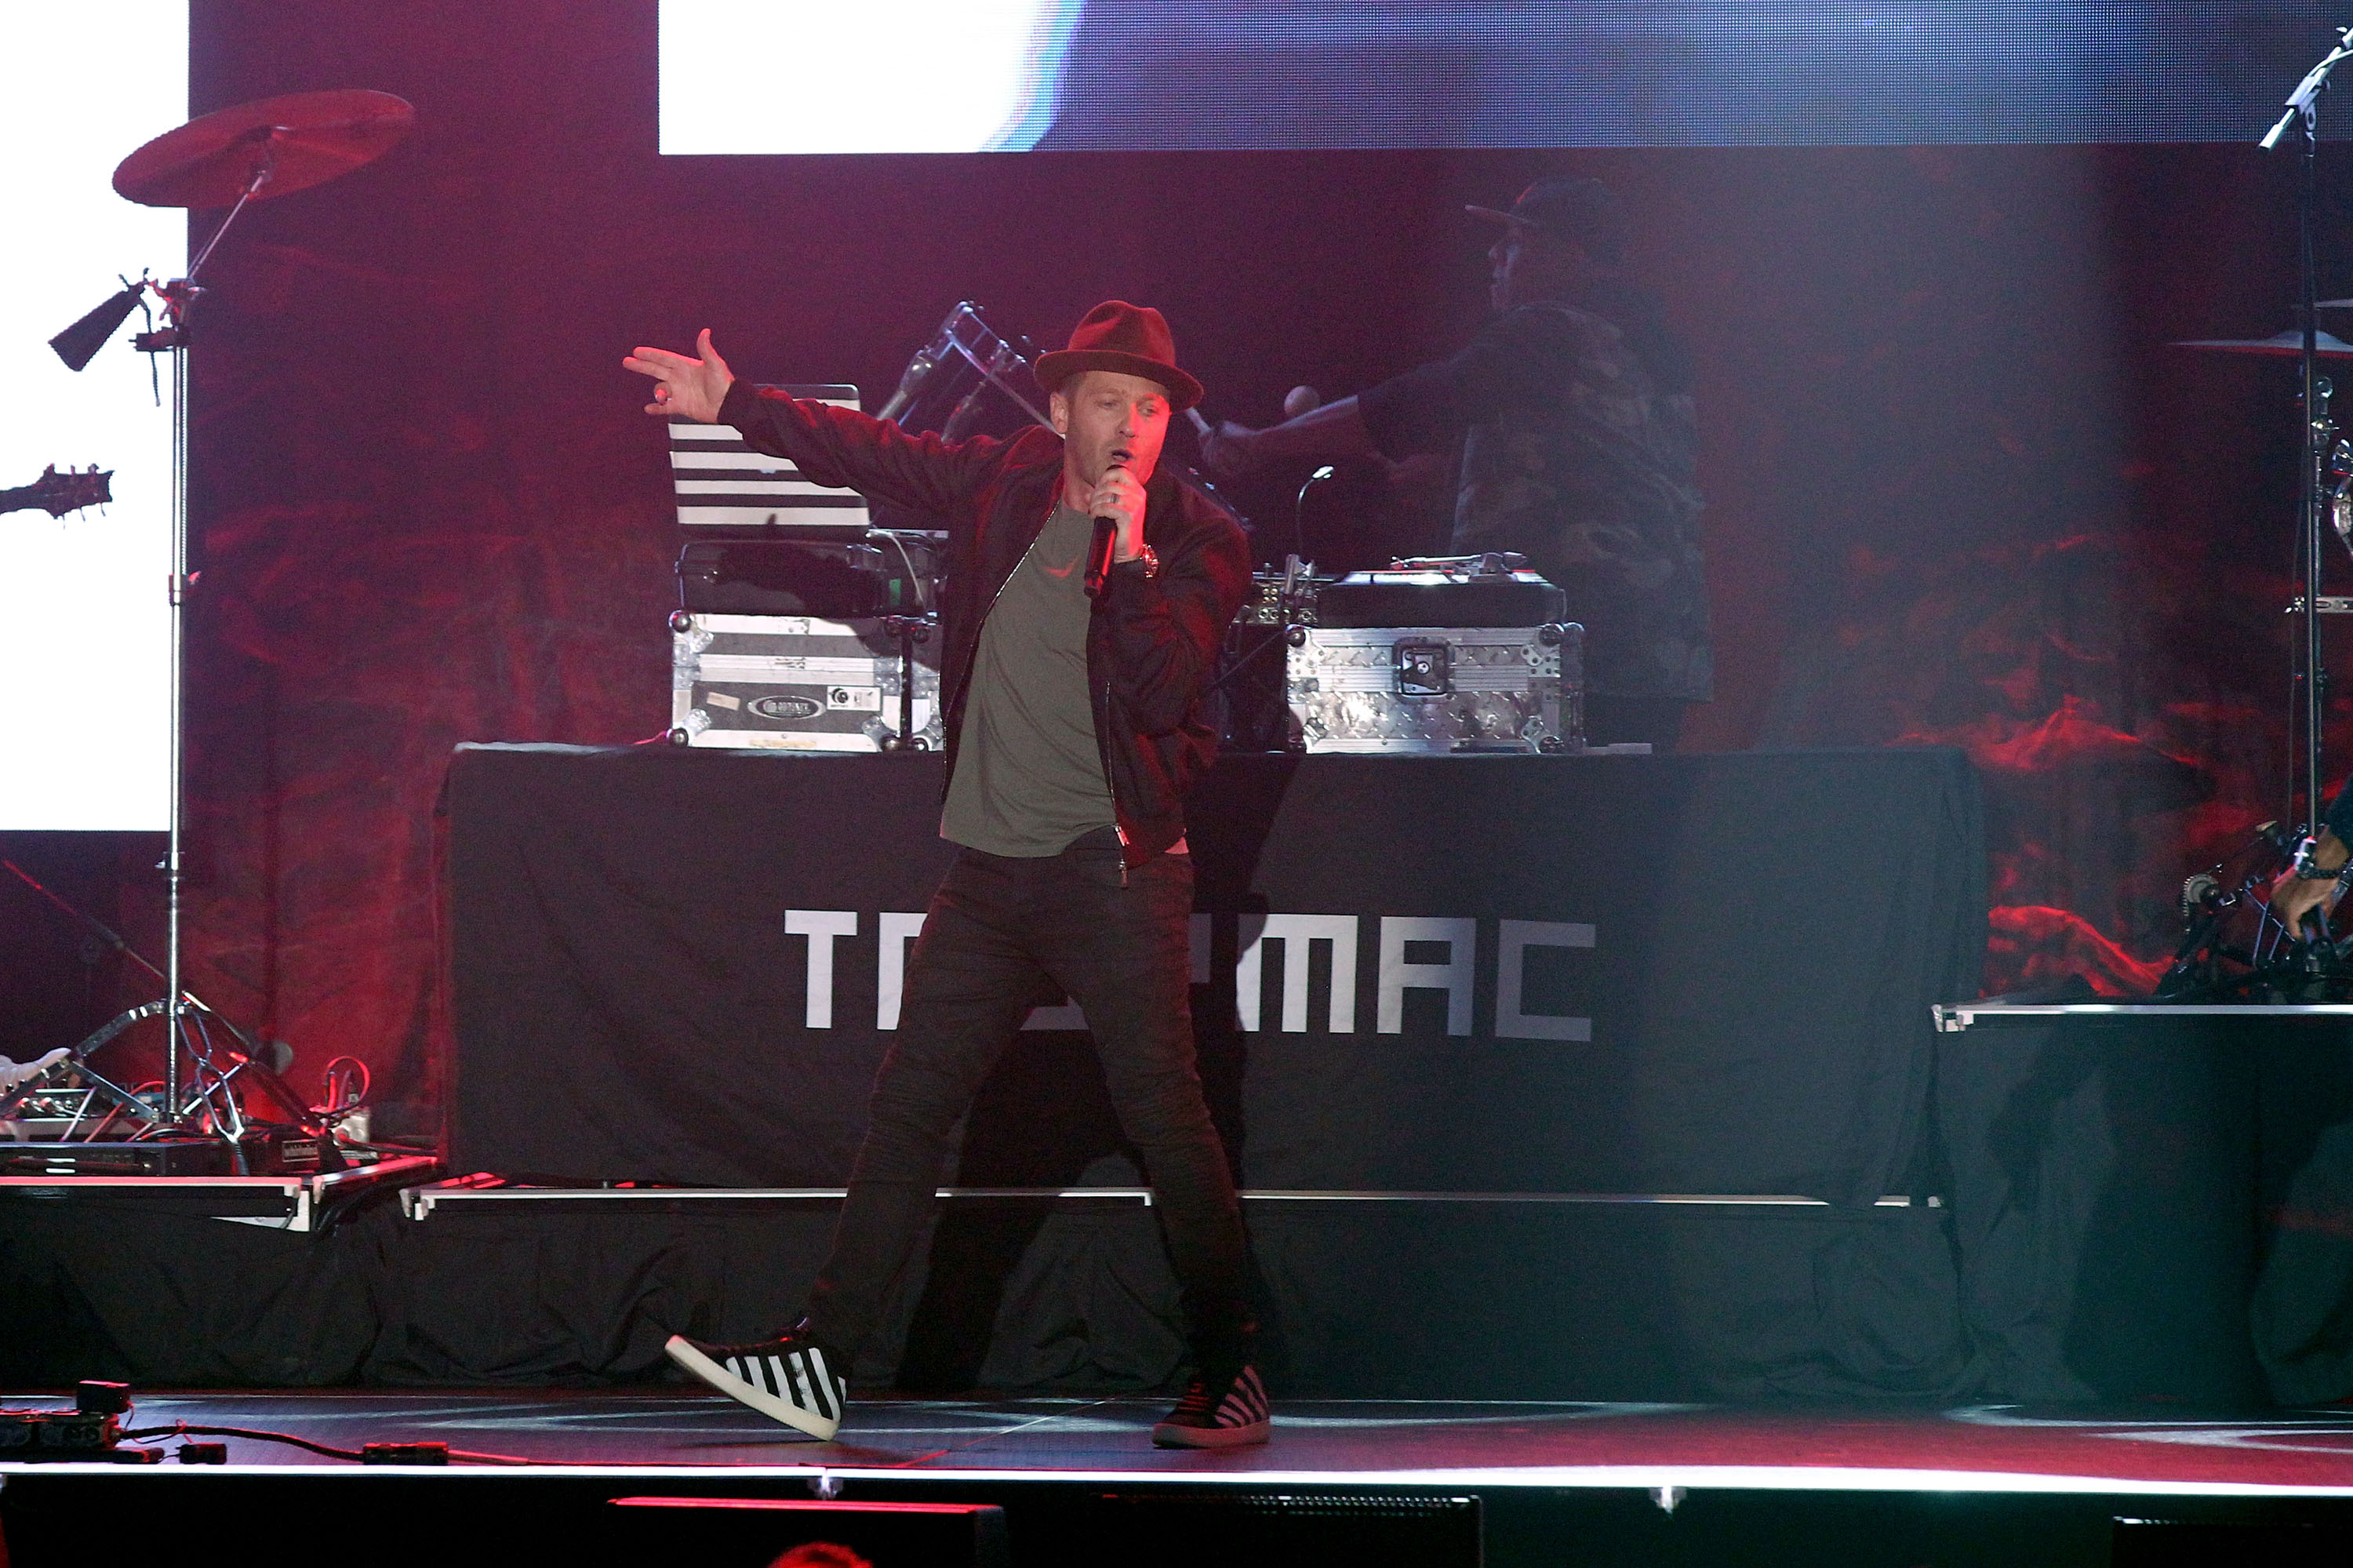 TobyMac's son found dead at his Nashville home